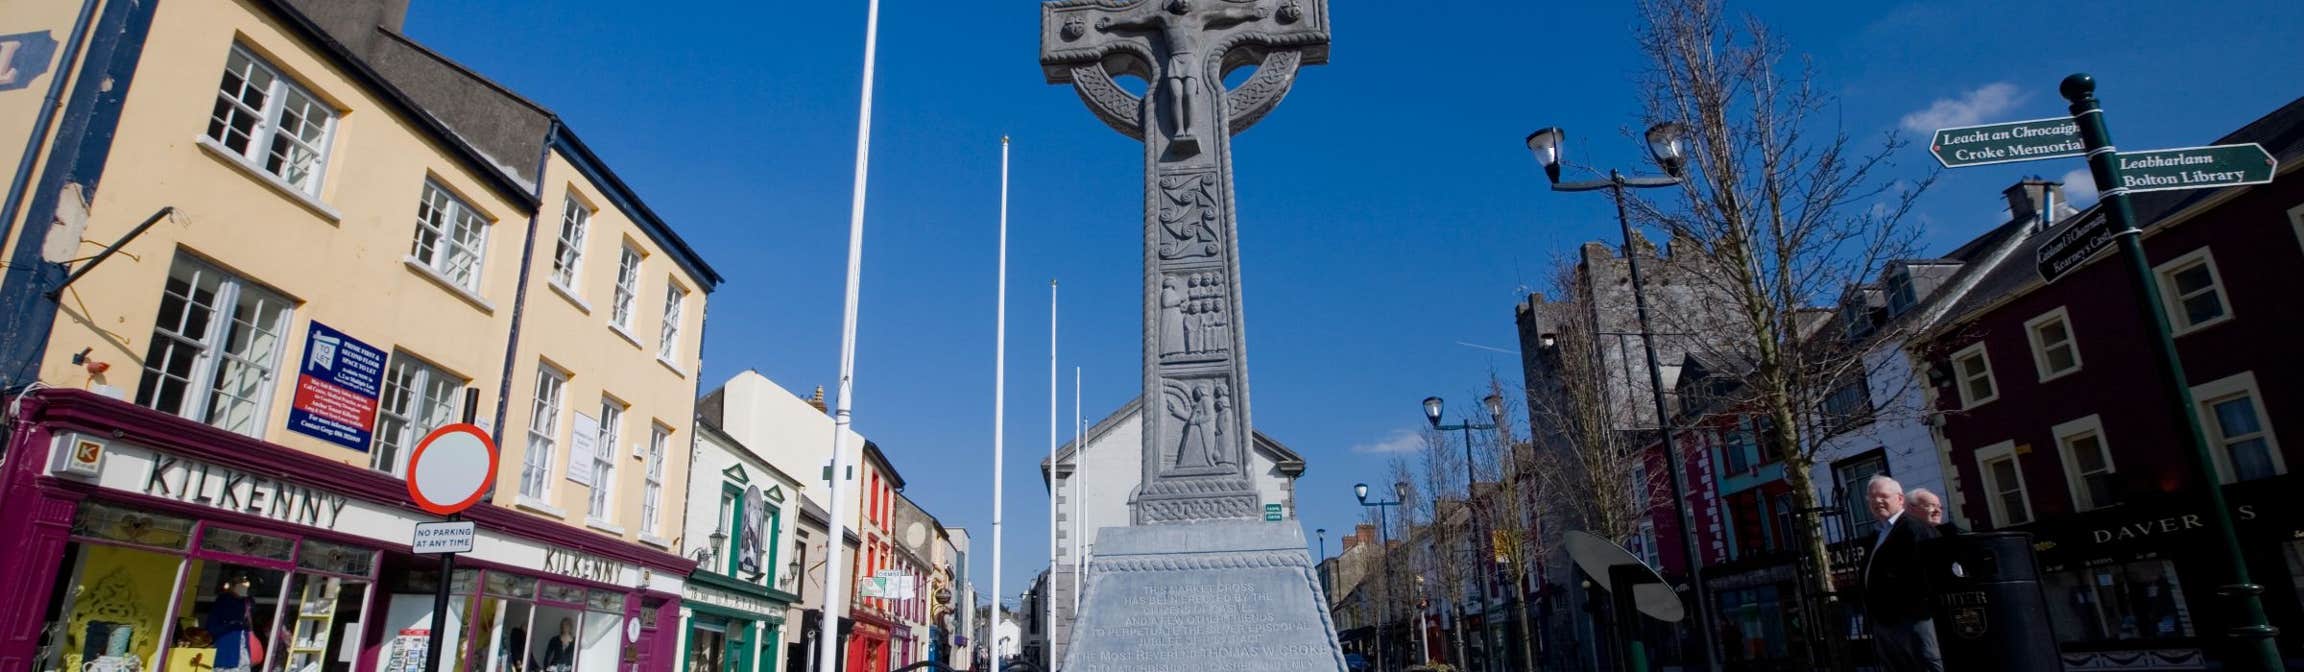 A high cross in Cashel Town in County Tipperary